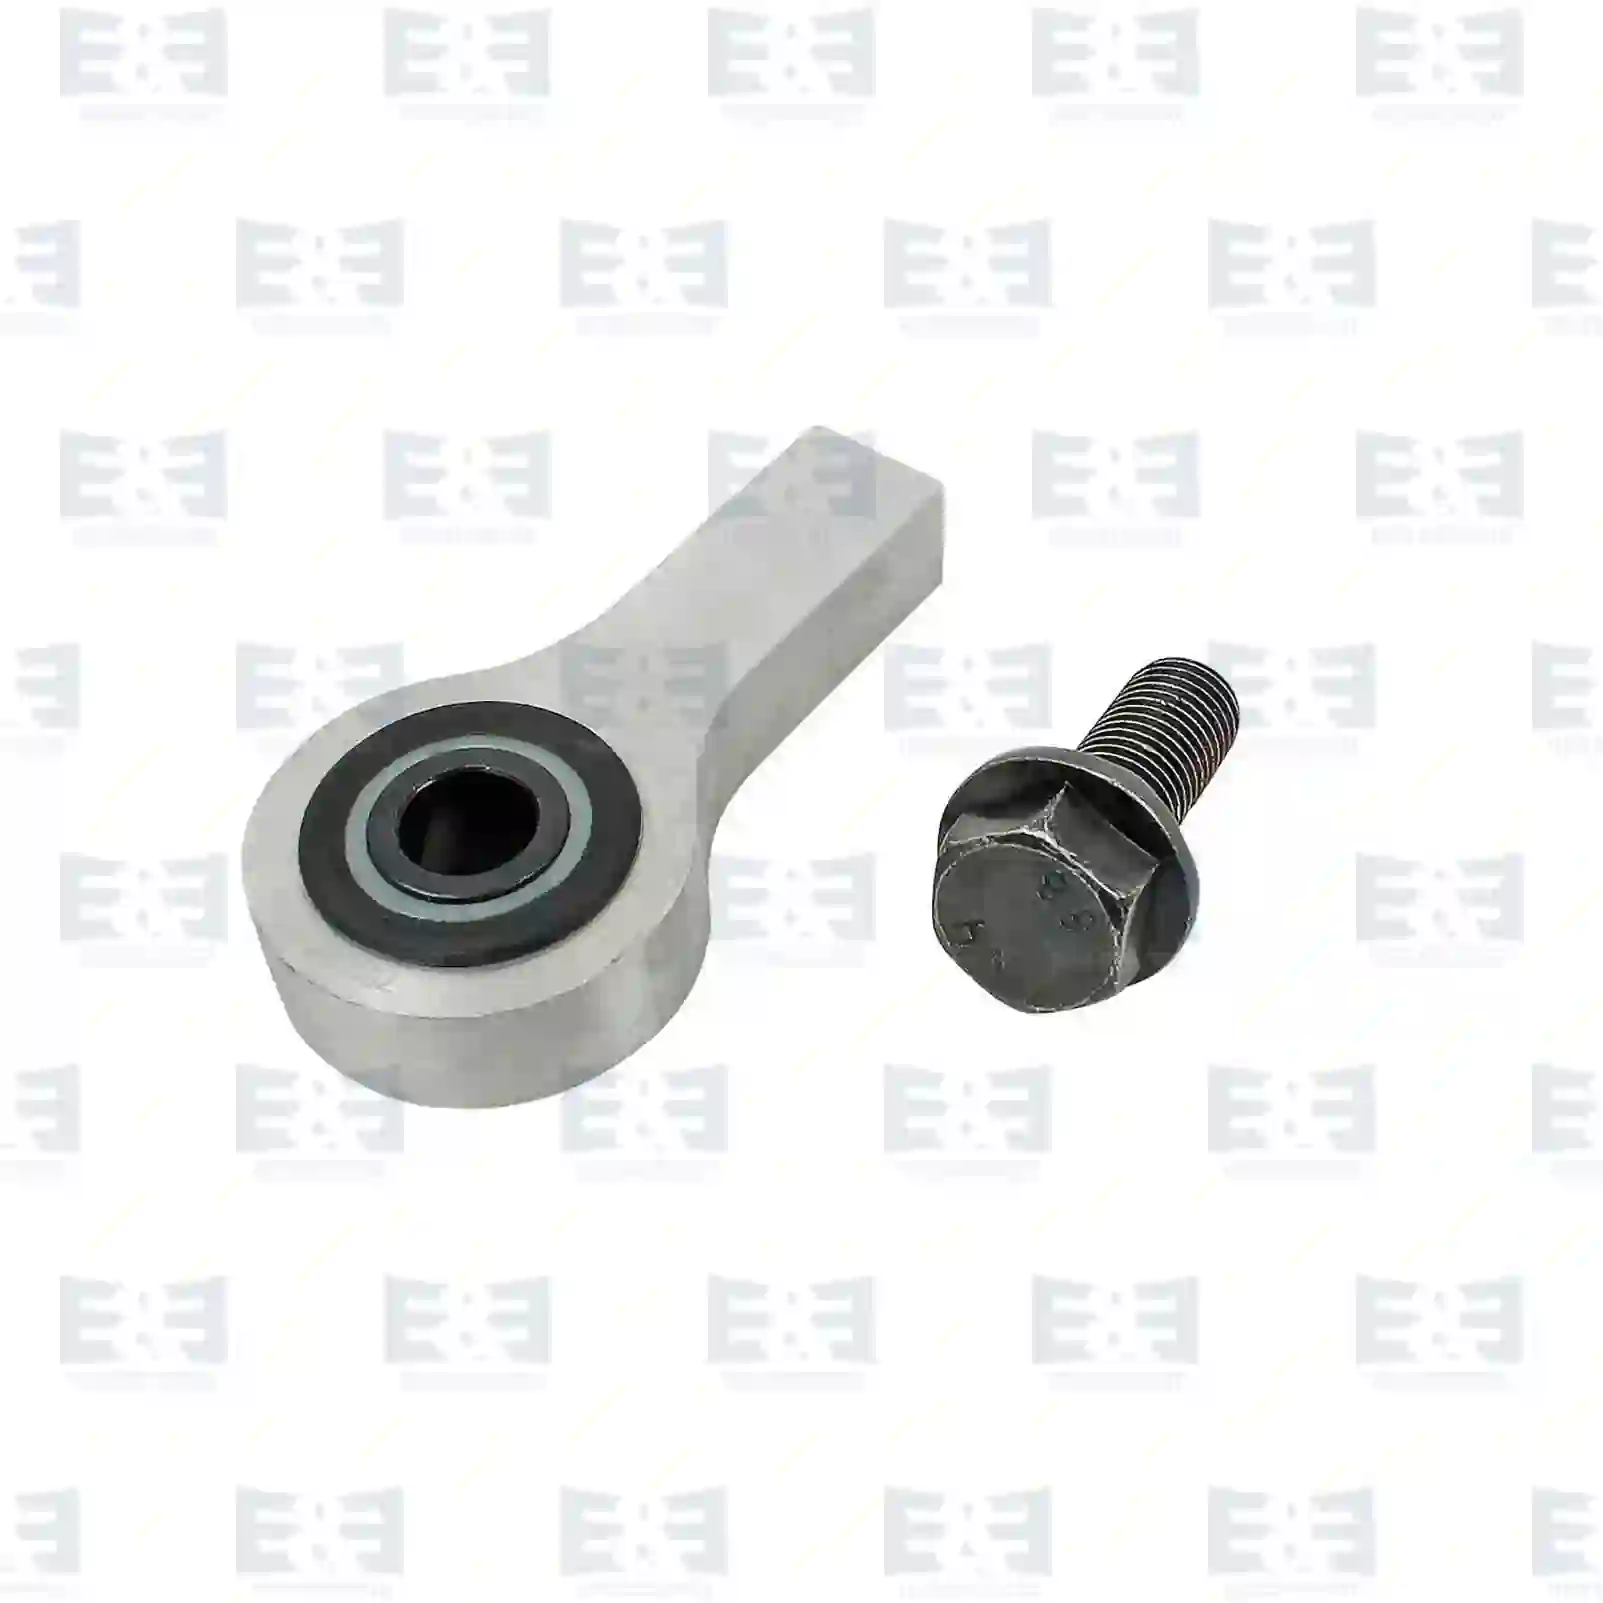  Bearing joint, complete with seal rings || E&E Truck Spare Parts | Truck Spare Parts, Auotomotive Spare Parts